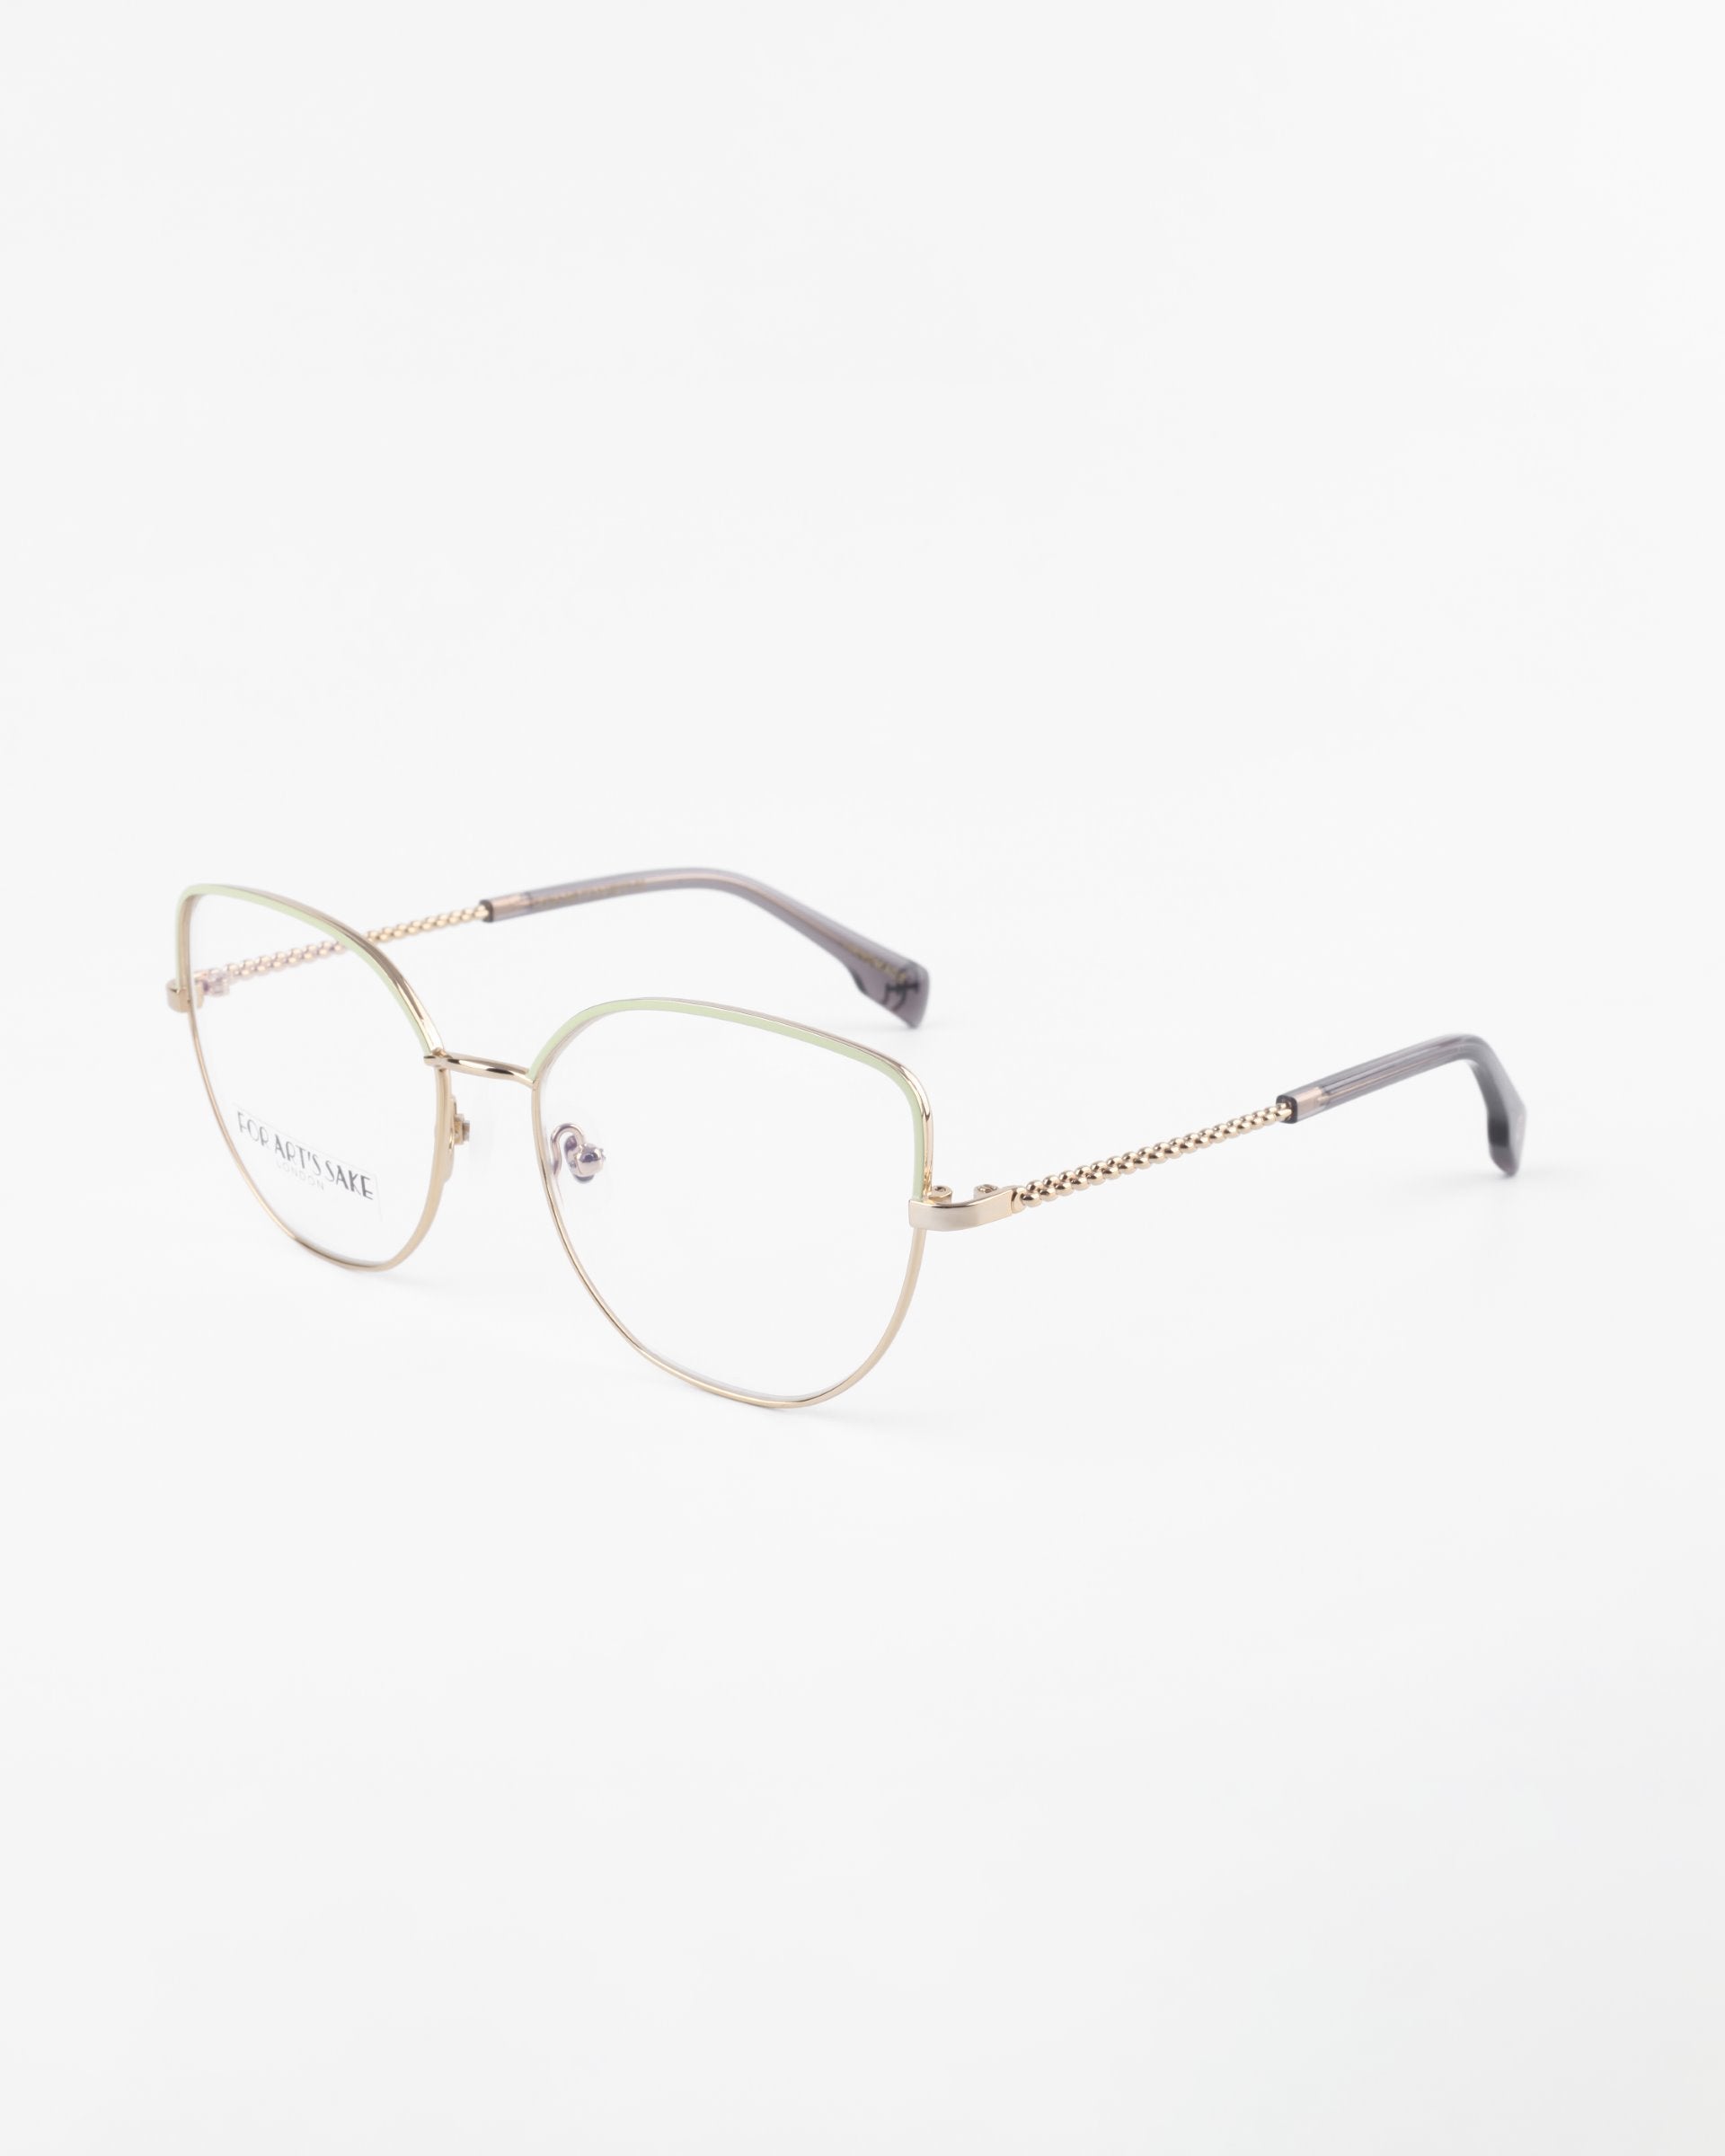 A pair of gold-rimmed Ophelia eyeglasses by For Art&#39;s Sake® with a slightly rounded square shape is shown against a plain white background. The glasses feature blue light filter lenses and a delicate chain-like design on the temples, transitioning to dark grey tips.